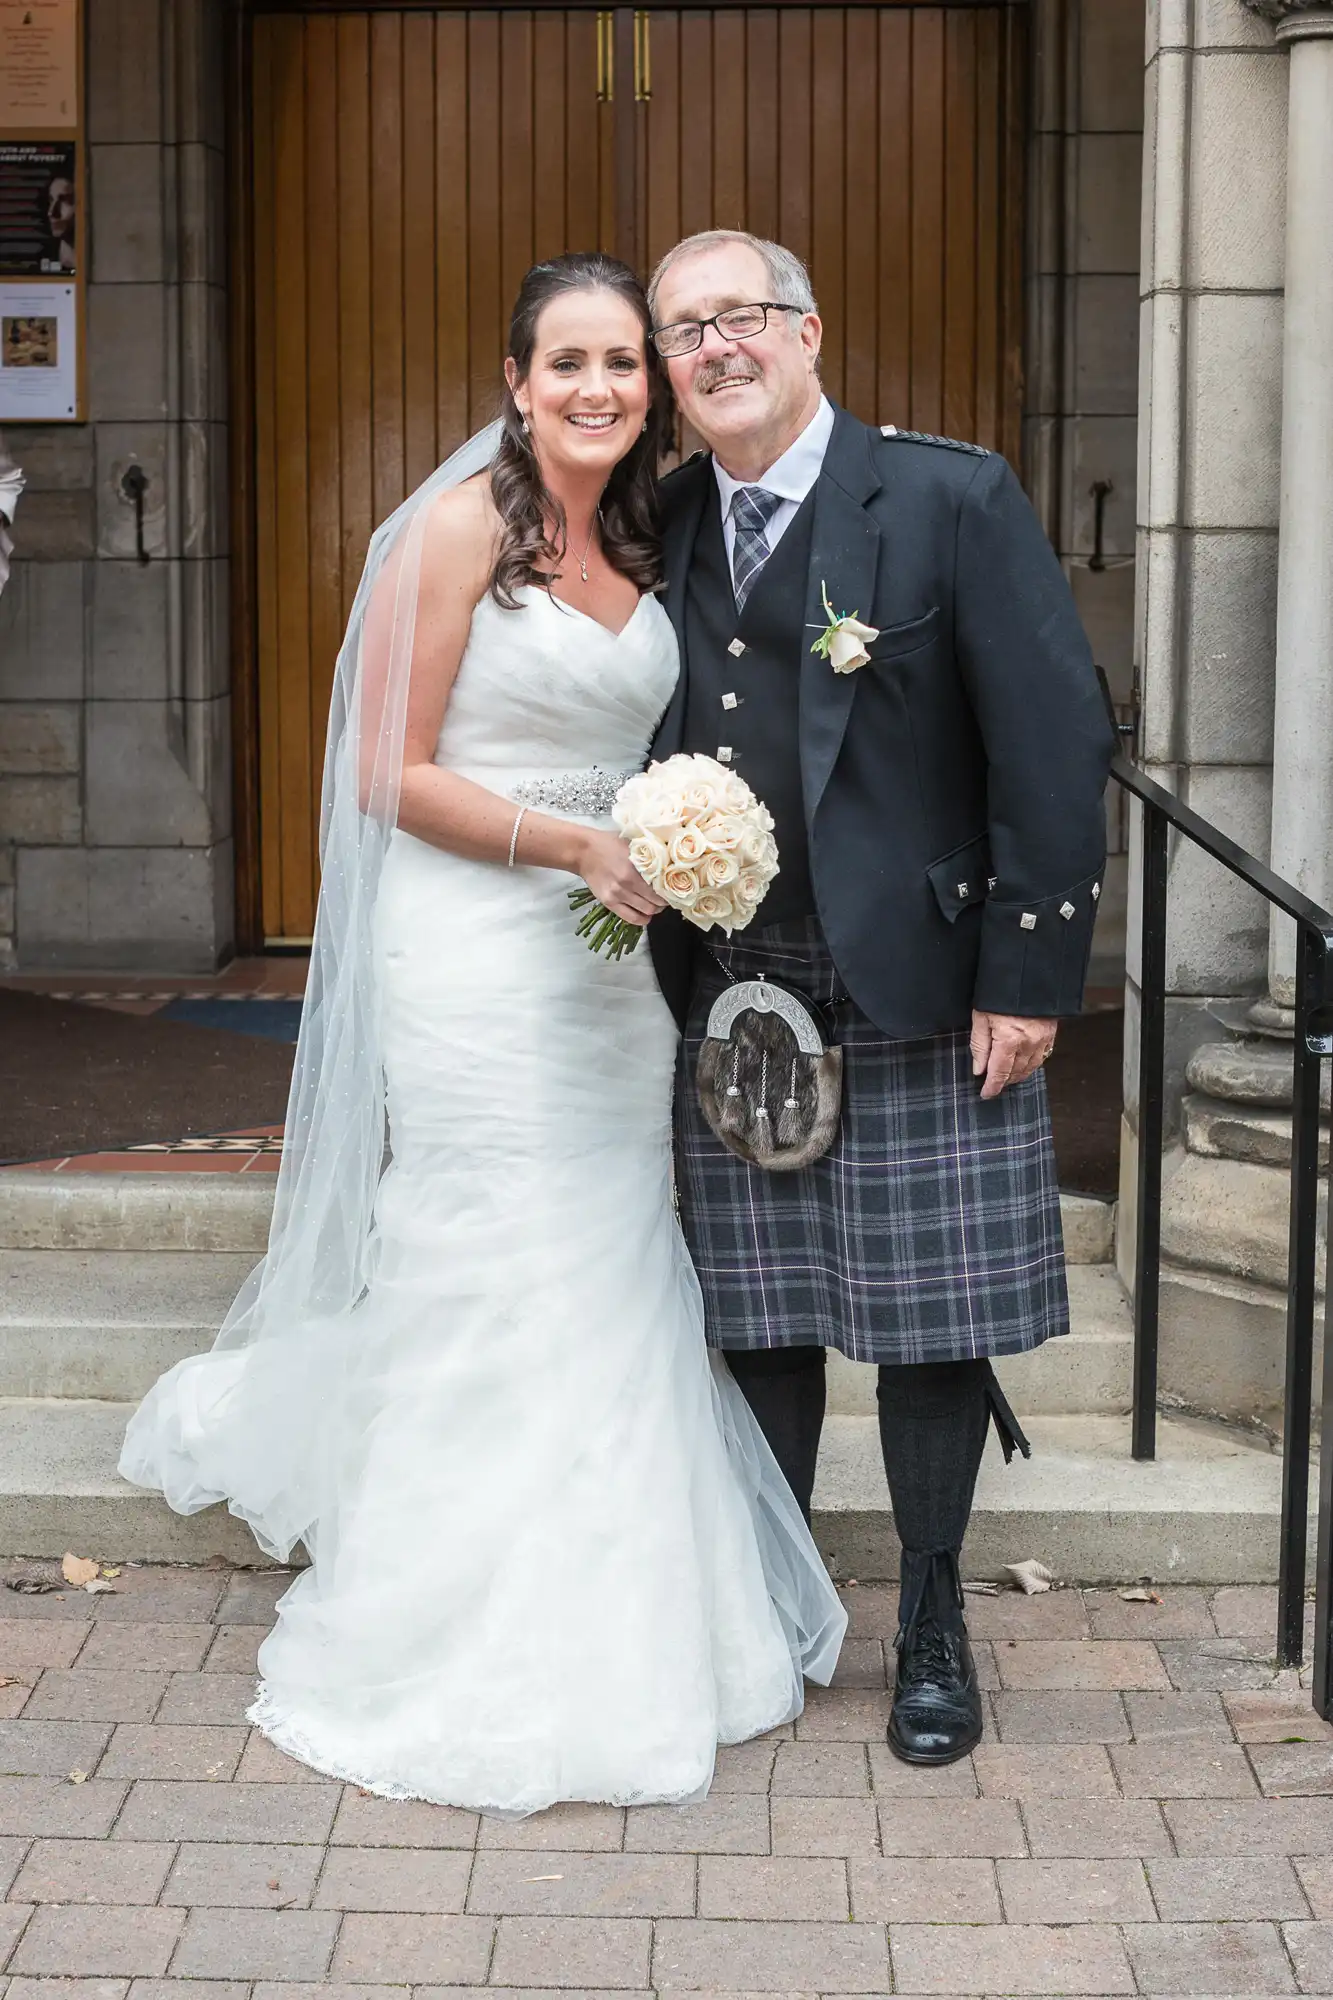 Bride in a white dress and groom in a kilt smiling outside a church entrance.